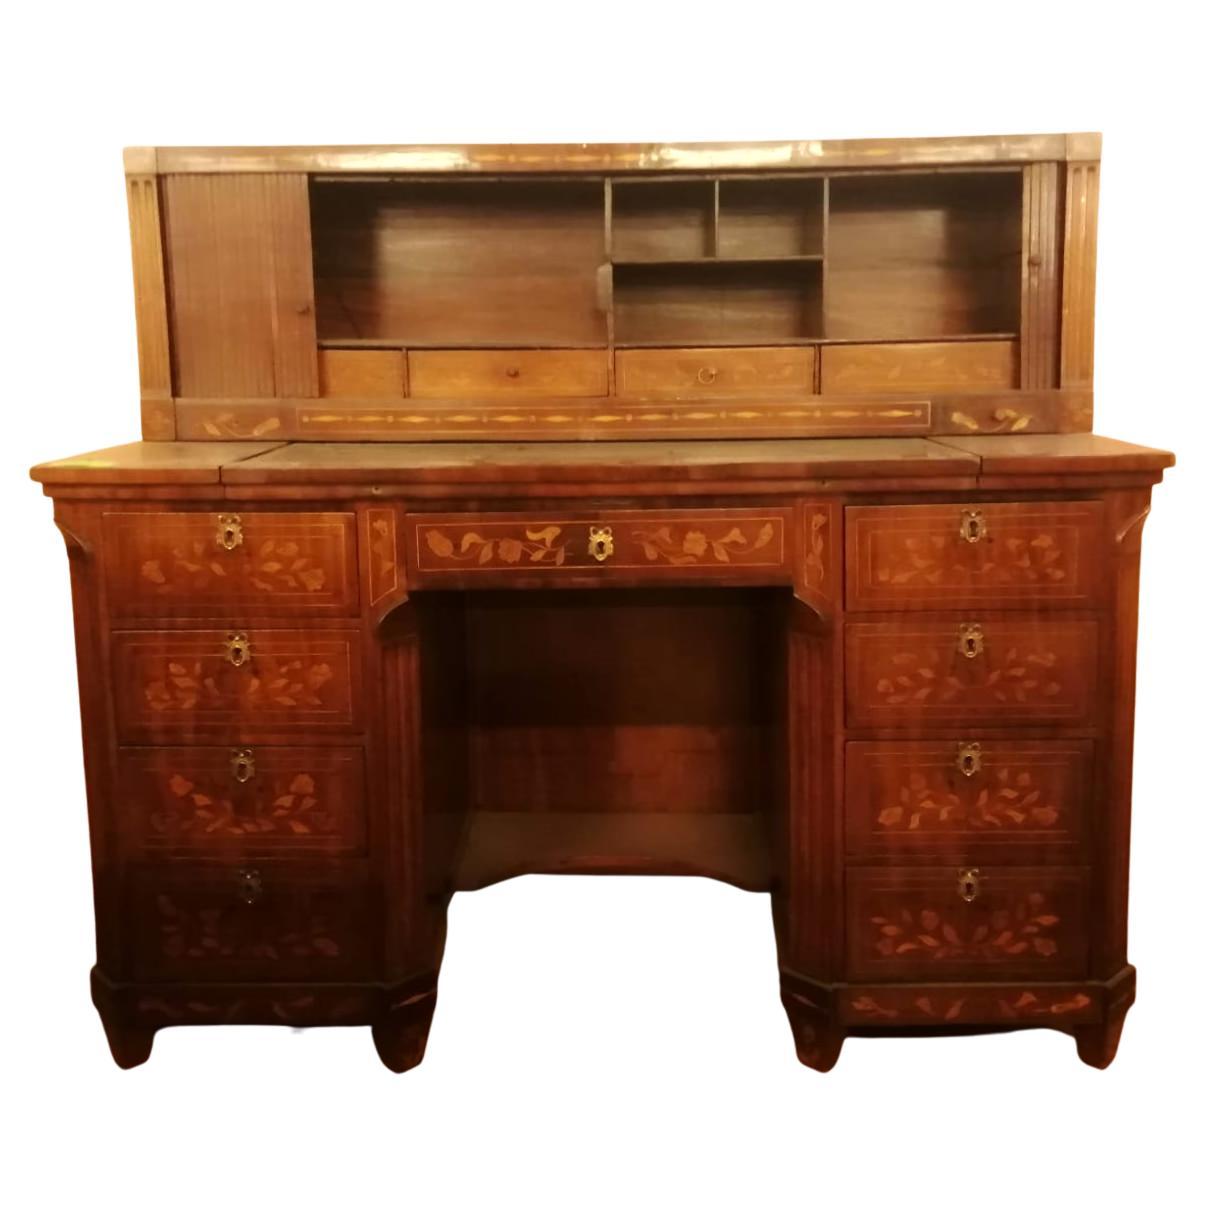 Dutch Desk of the Early 800 in Mahogany Finely Inlaid For Sale